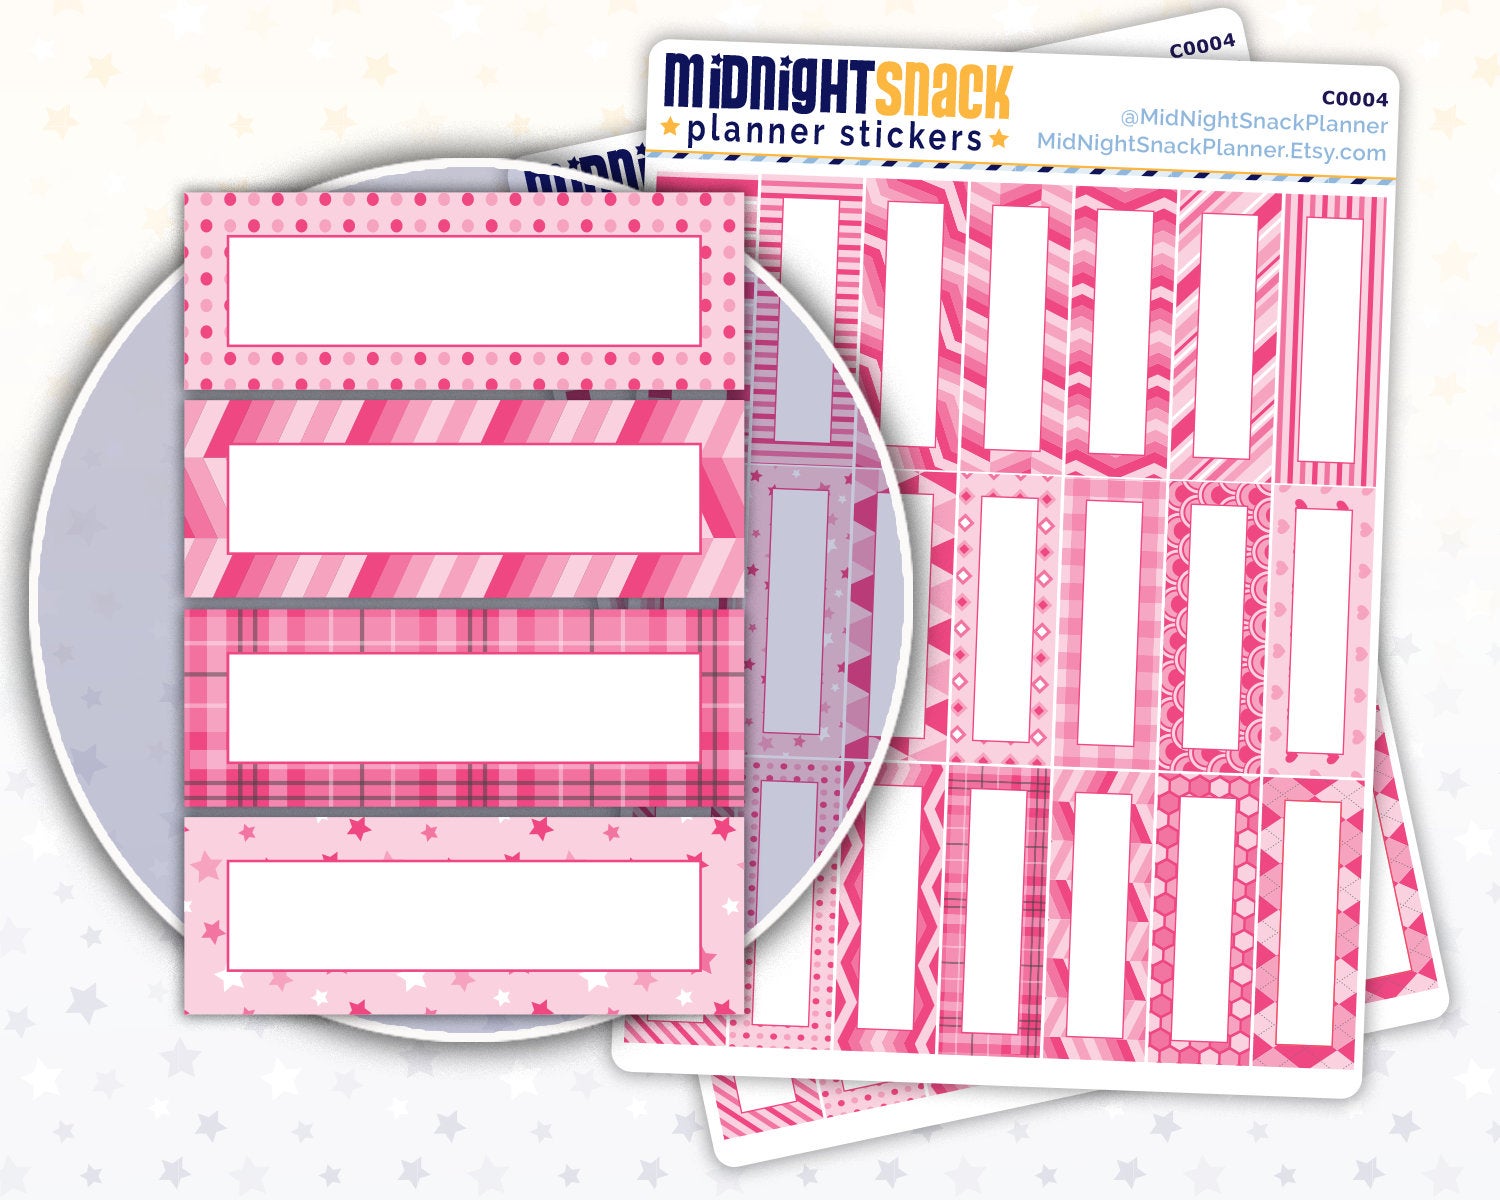 Pink Patterned Quarter Boxes Planner Sticker from Midnight Snack Planner